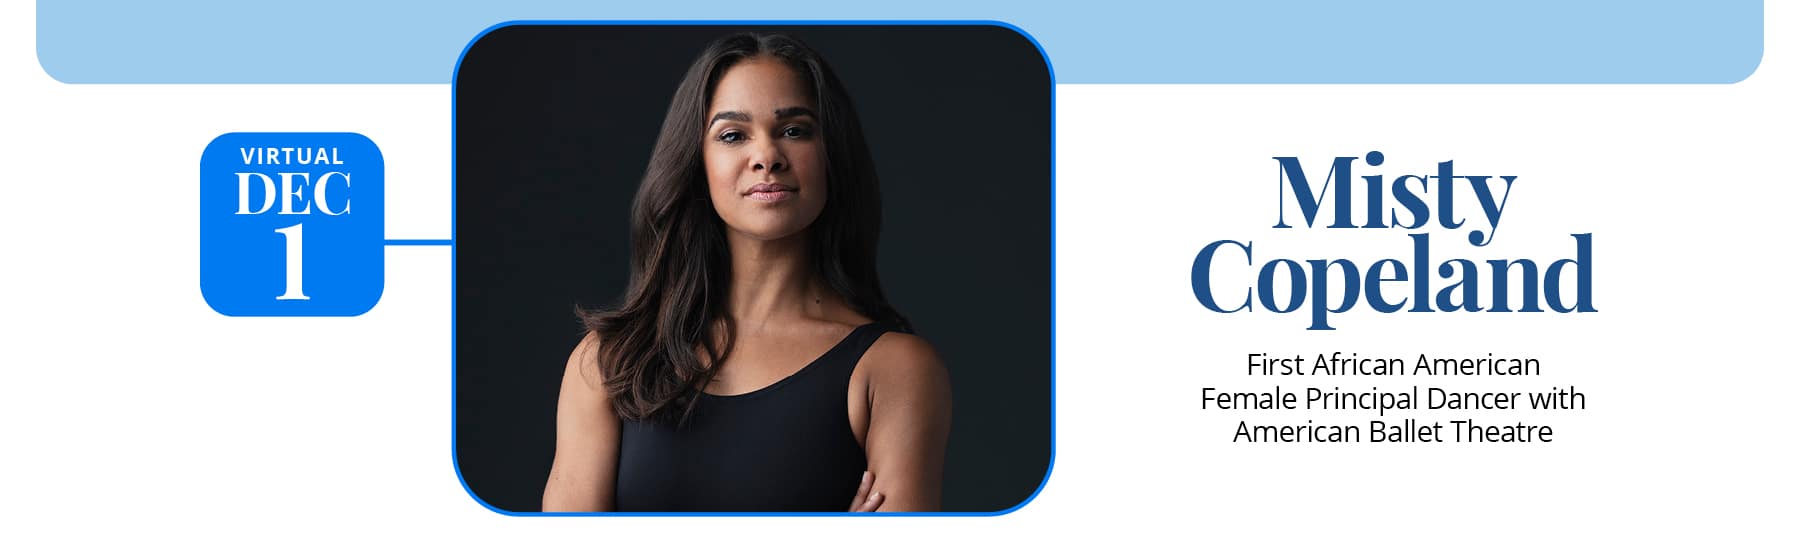 Join Misty Copeland at the MA Conference for Women "Conference Anywhere" on December 1!